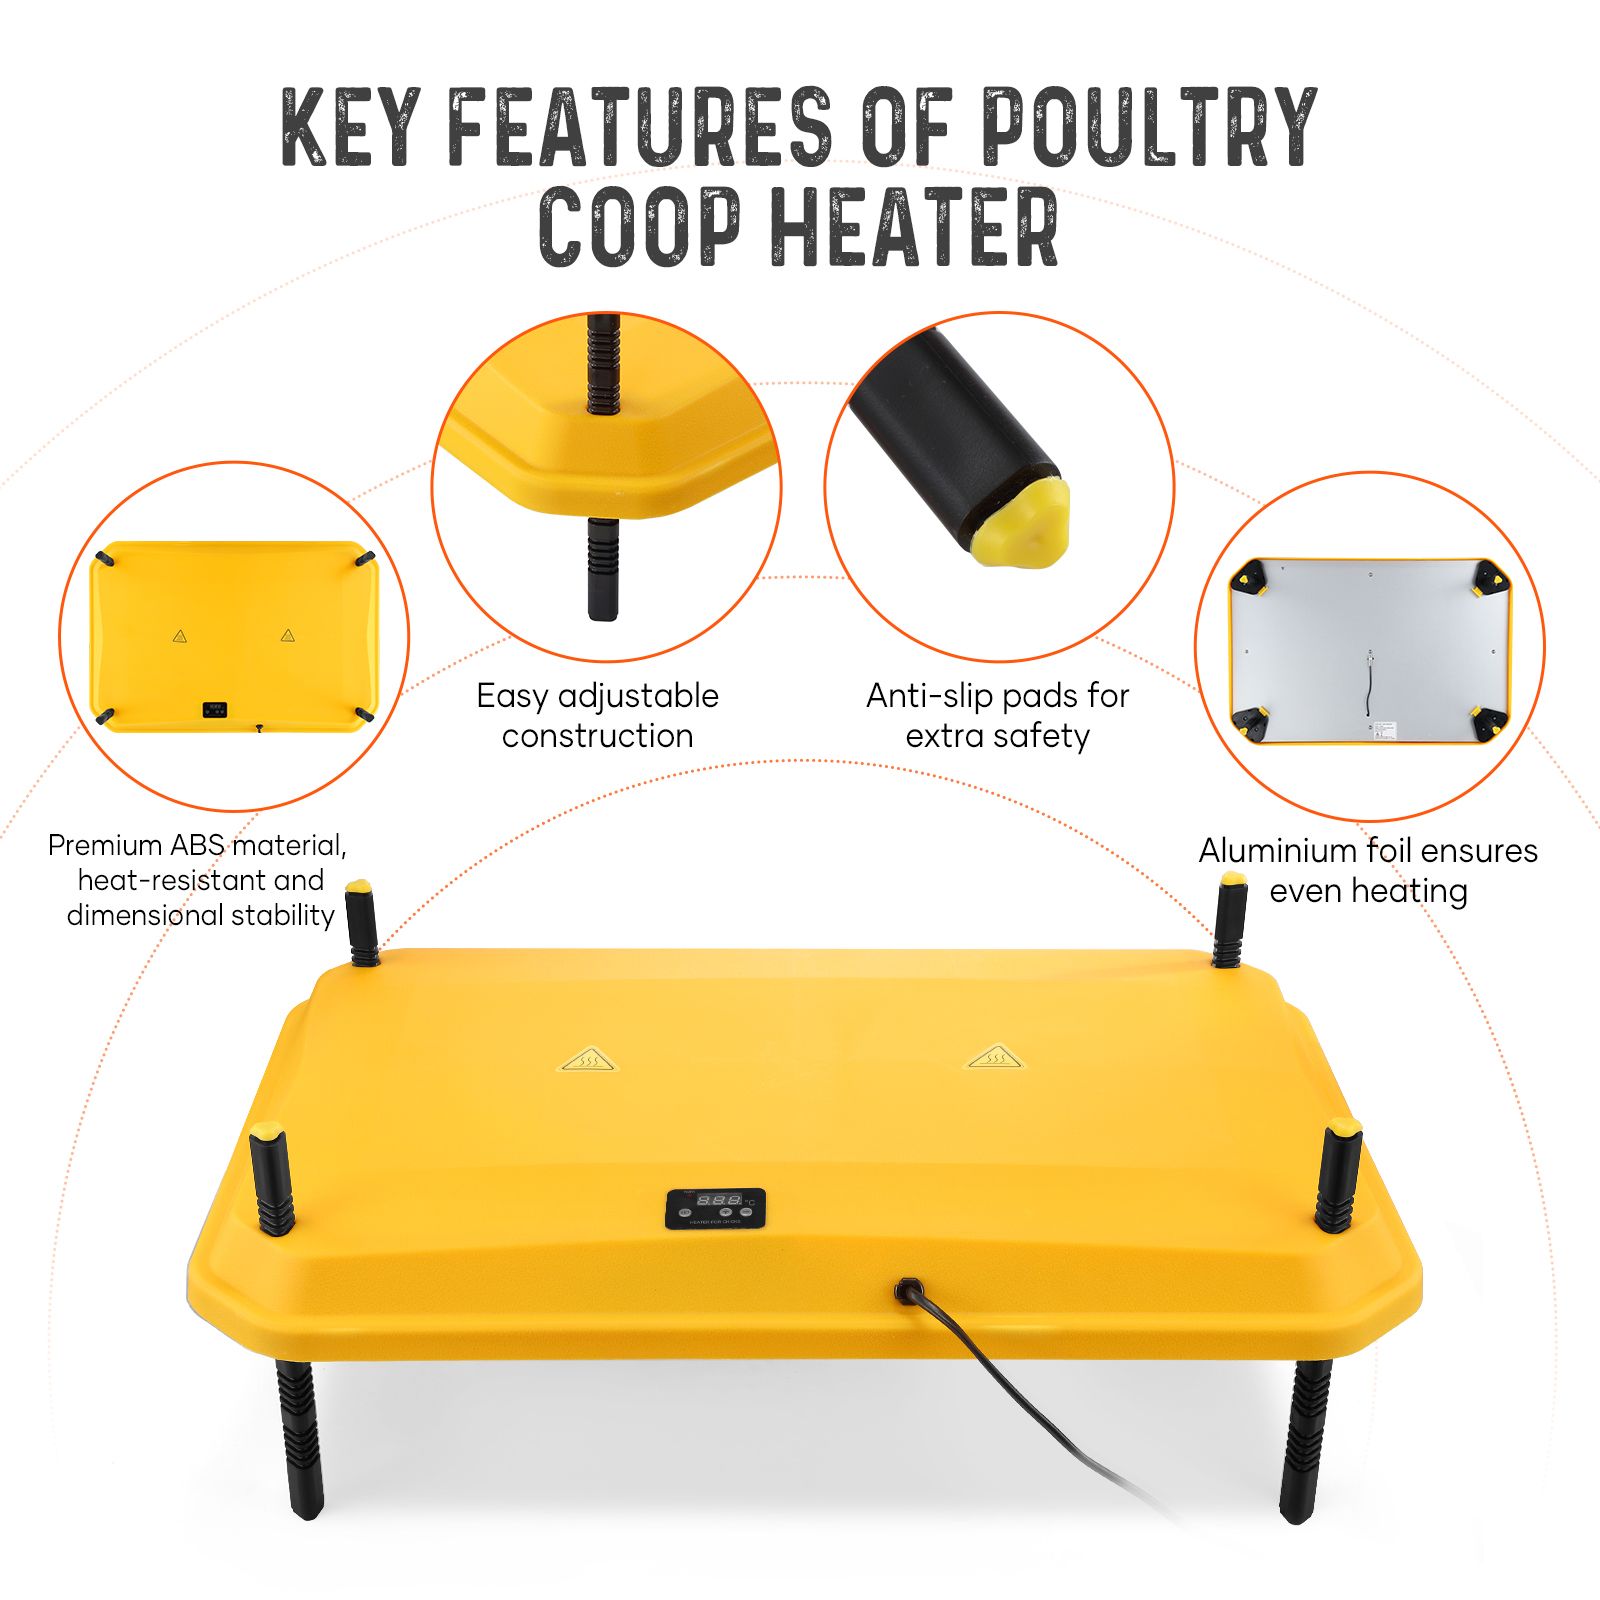 Chick Brooder Heating Plate Warmer Chicken Coop Brooding Heater Poultry Duckling Chook 40x60cm 40 to 50 Chicks Adjustable Height